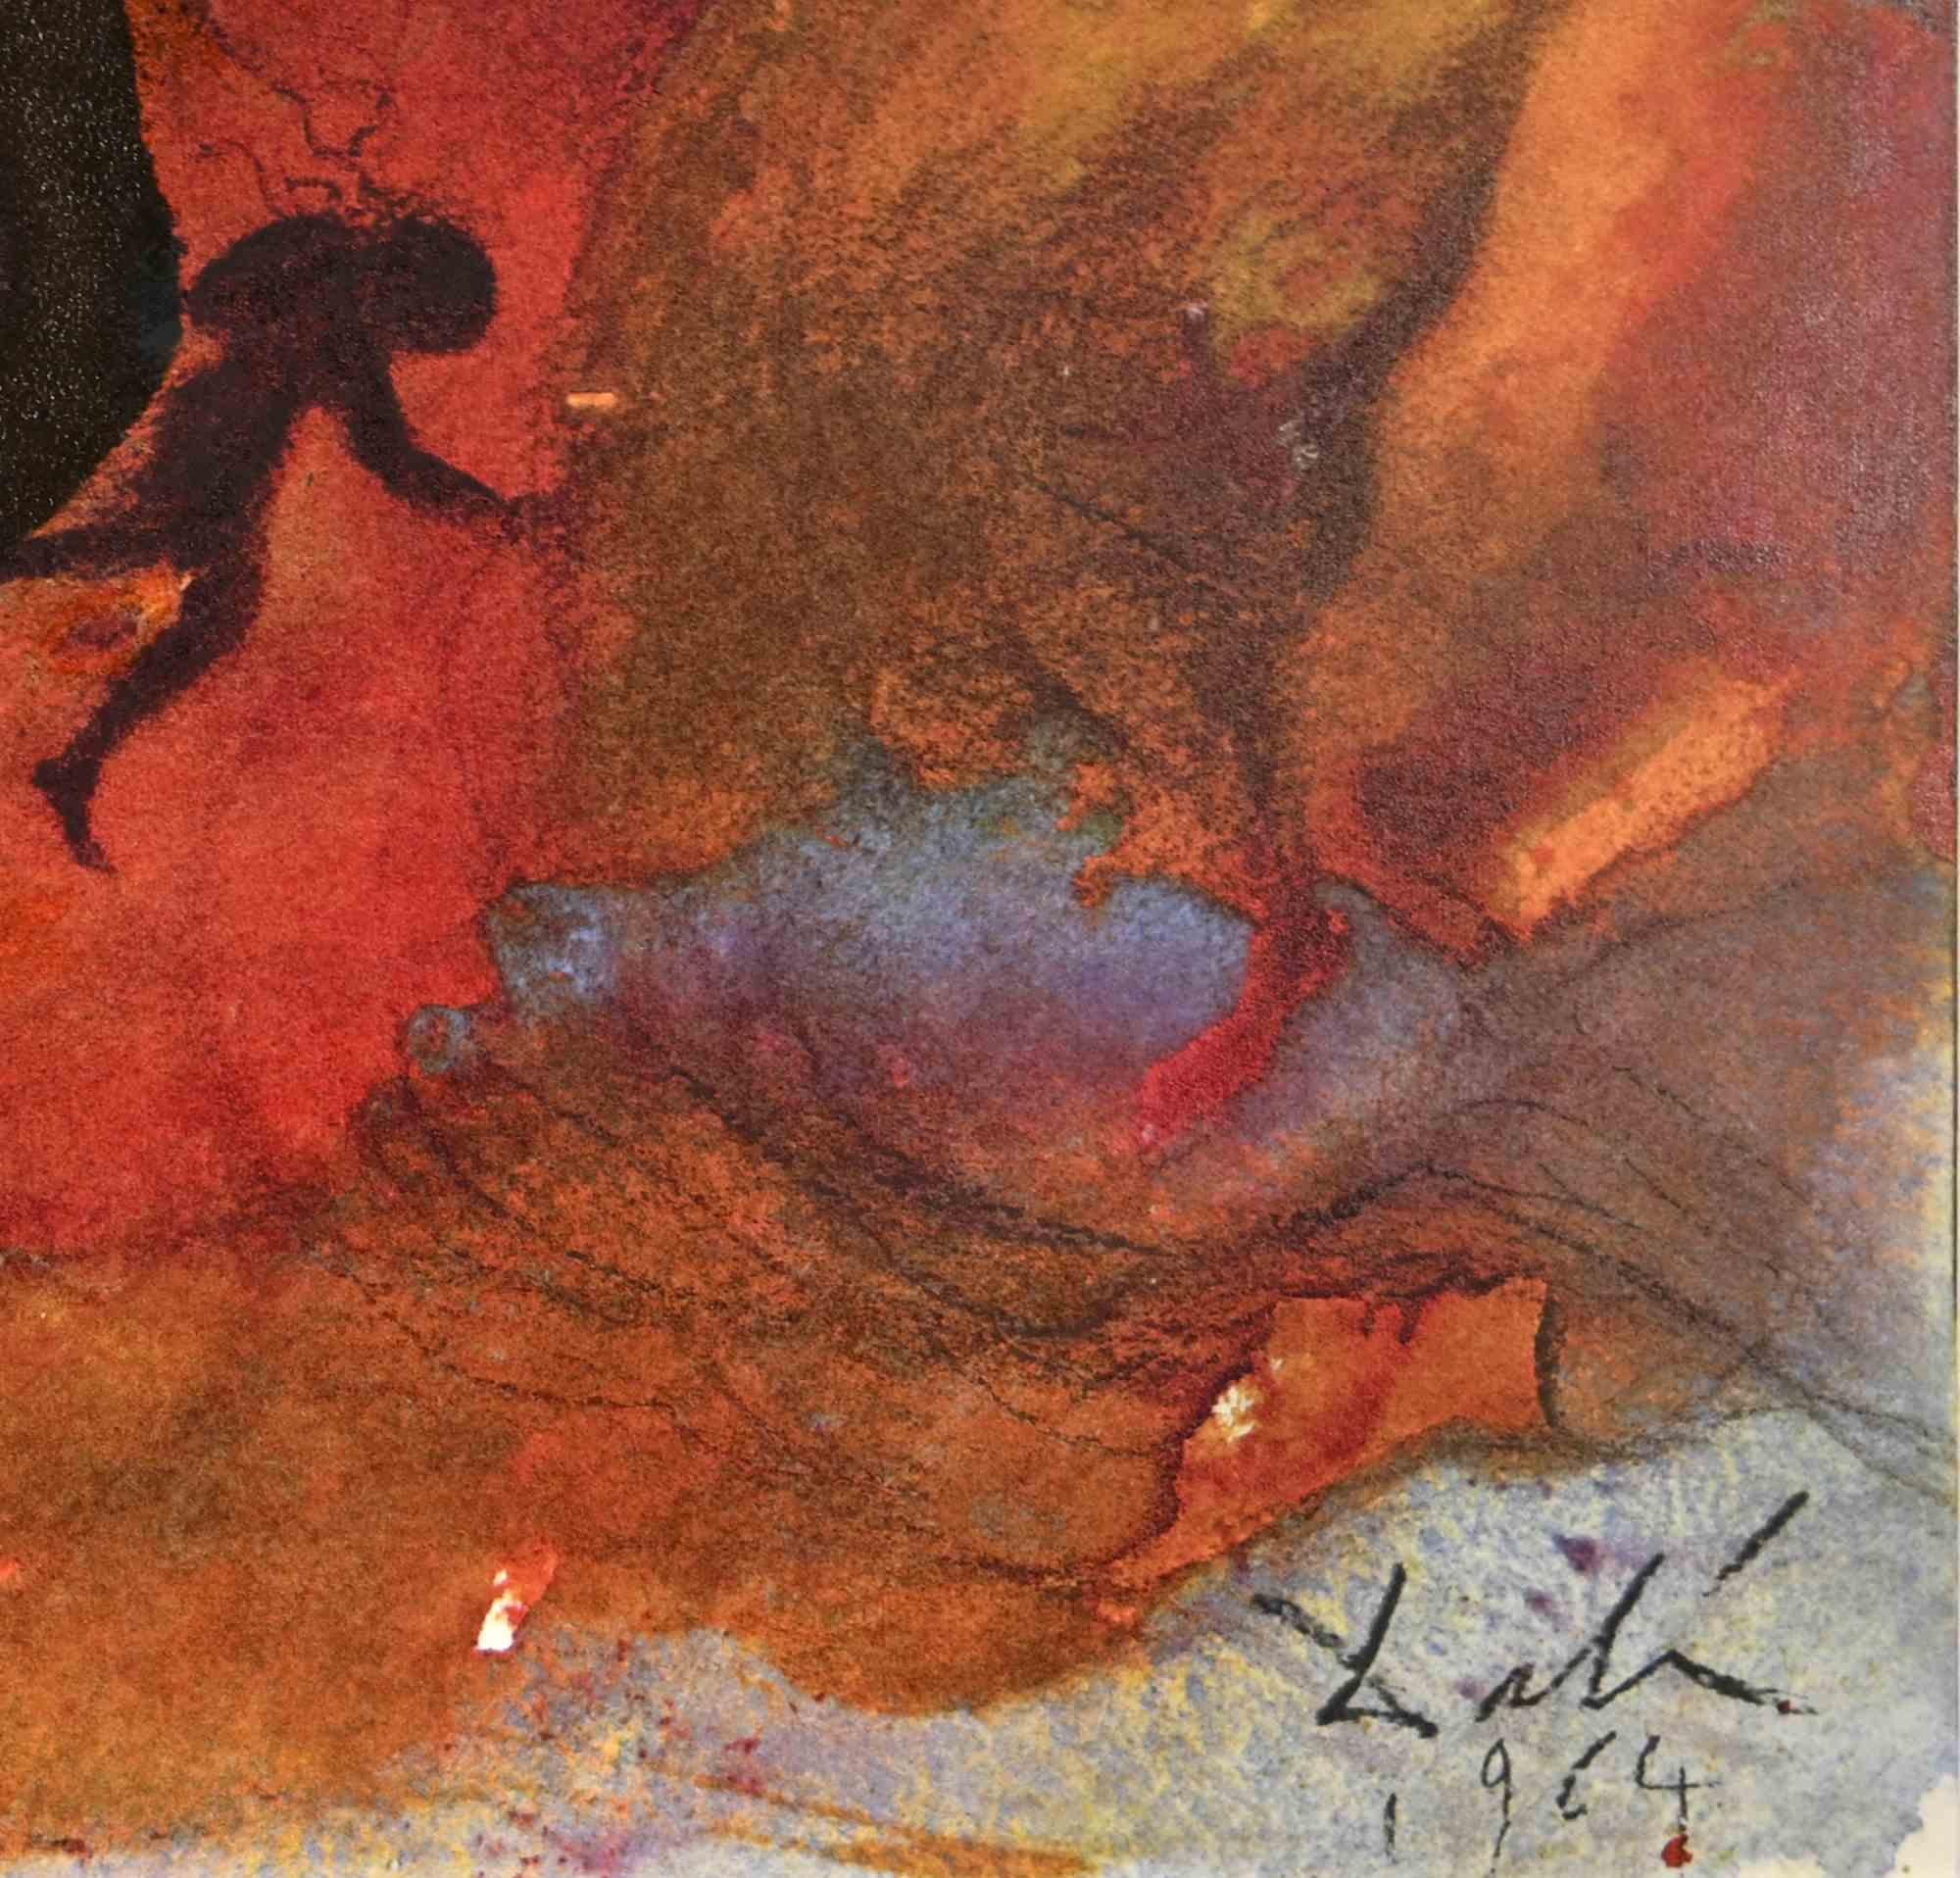 Jonah in the Belly of the Whale - Lithograph - 1964 - Print by Salvador Dalí